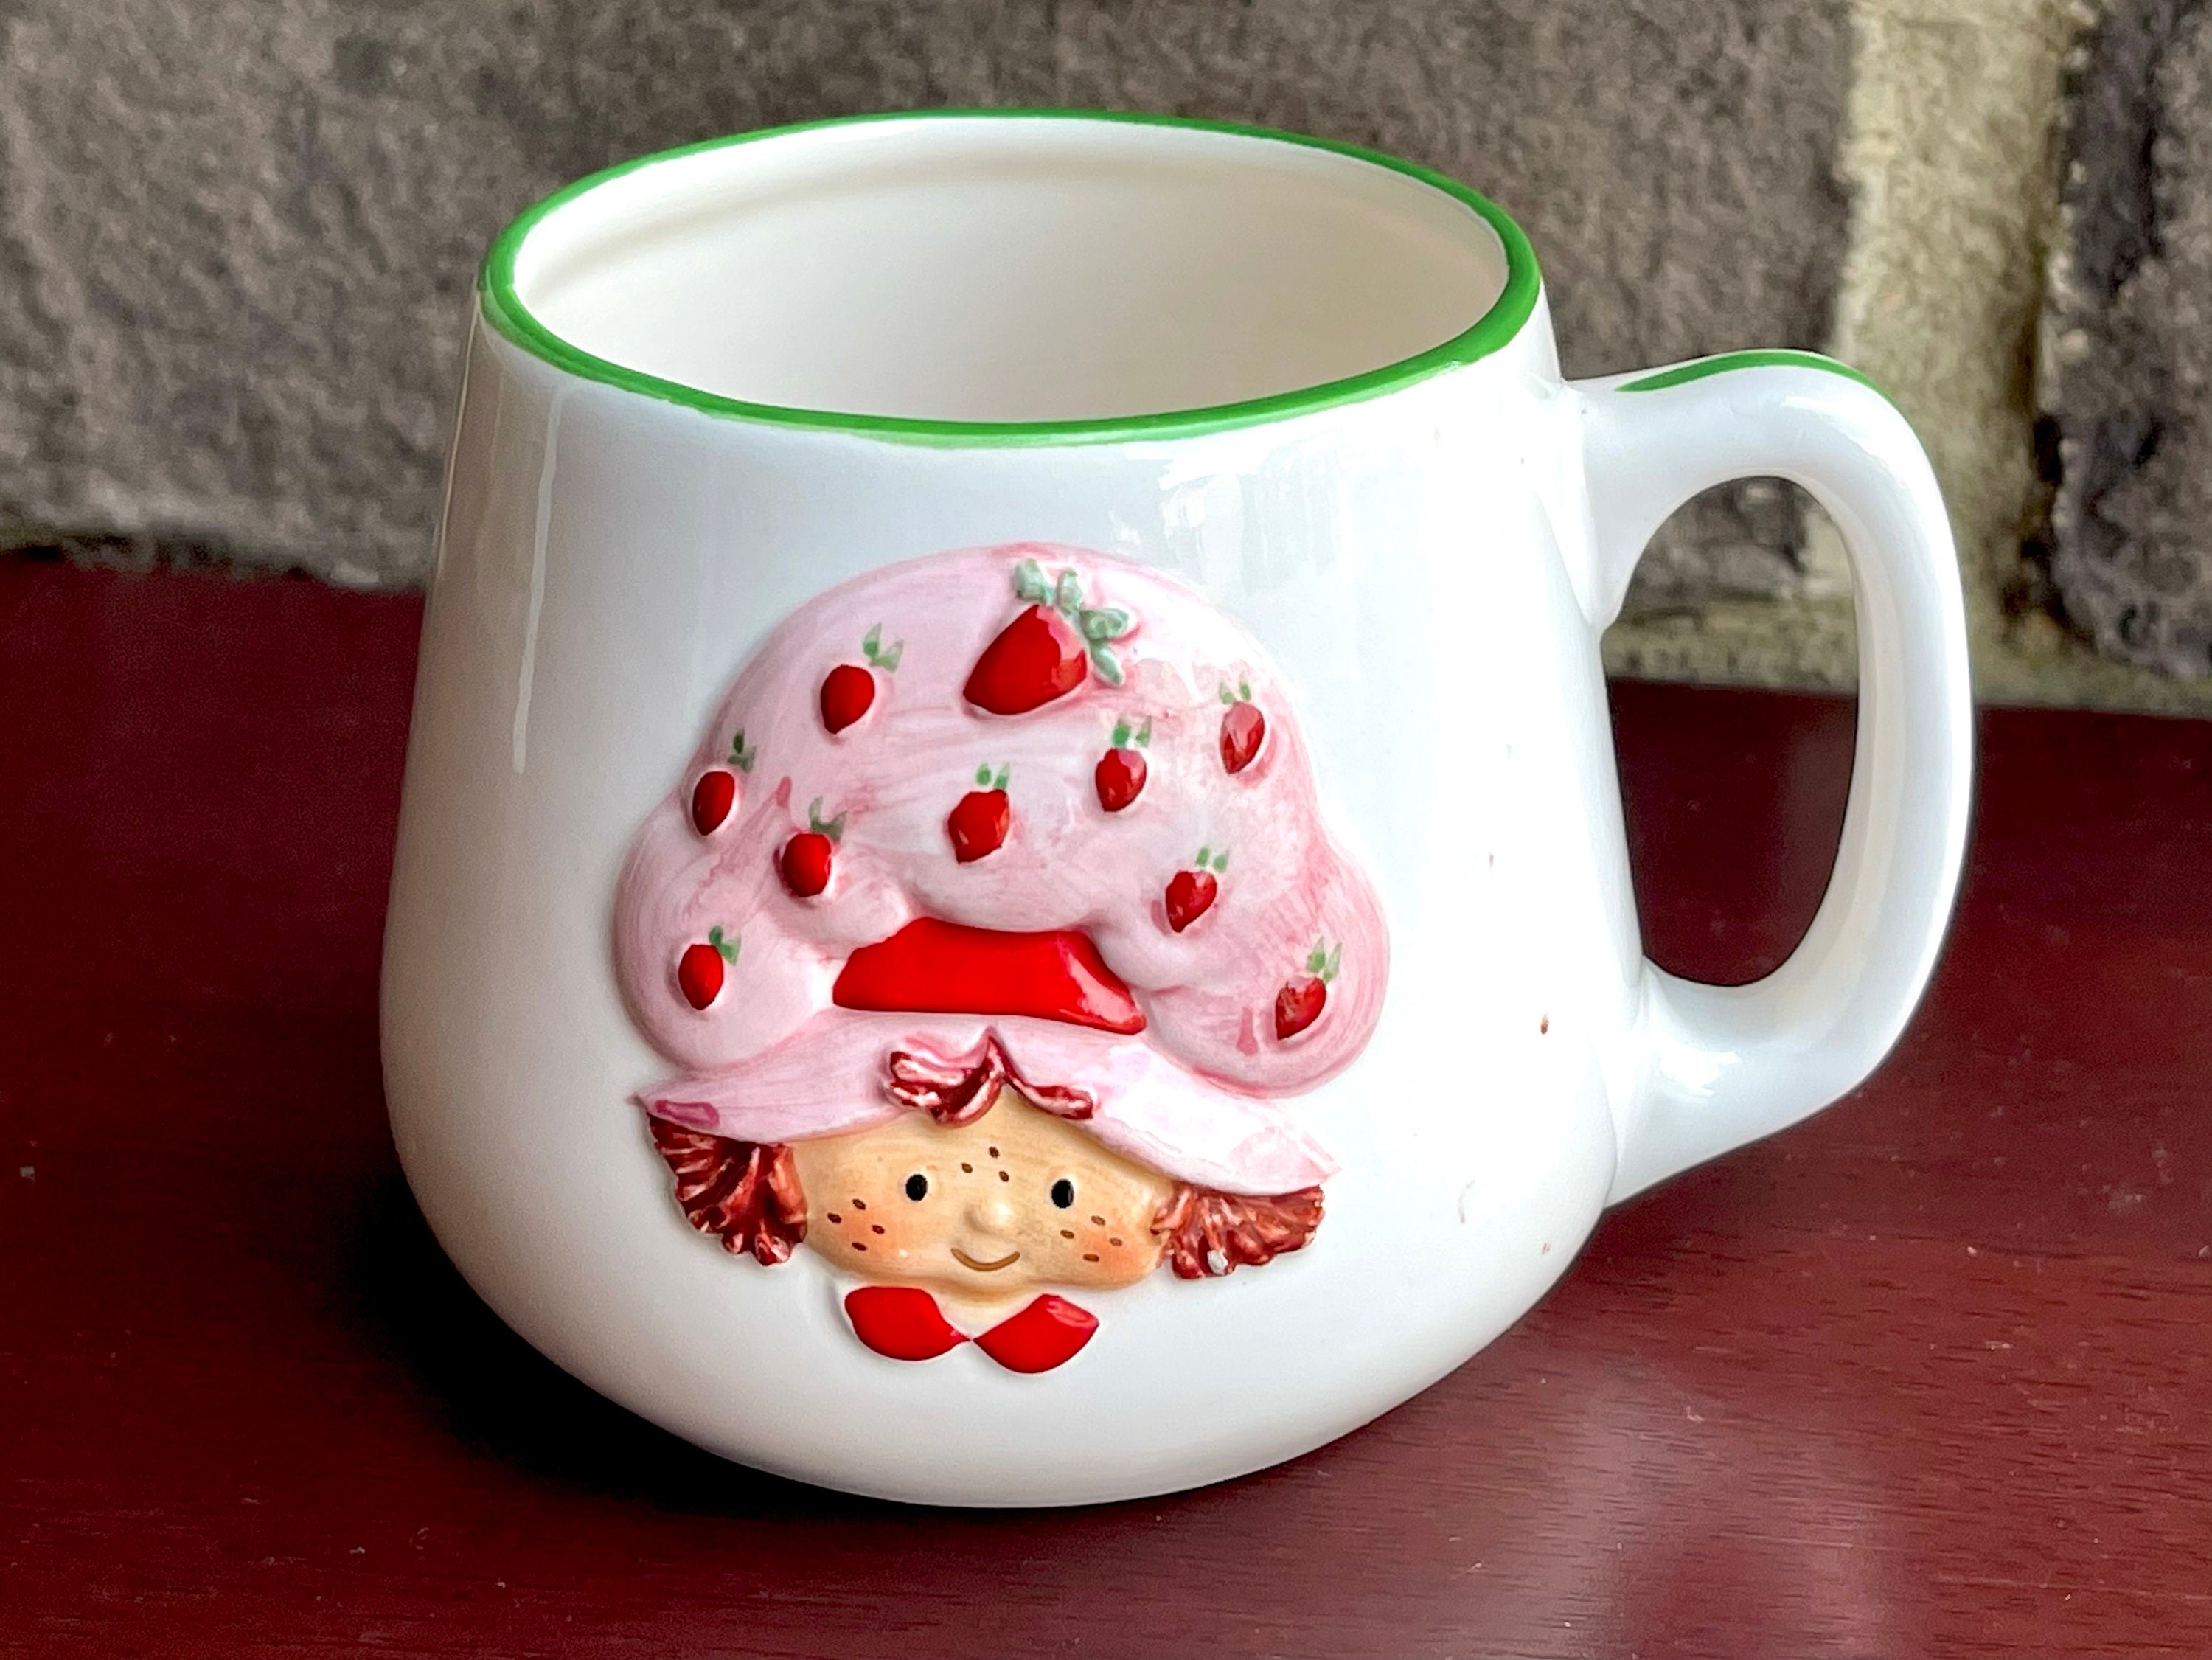 Creative Cute Fruit Ceramic Mug With Straw Ins Style Strawberry Cup Water  Bottle for Girls Couple Porcelain Mugs Coffee Cups